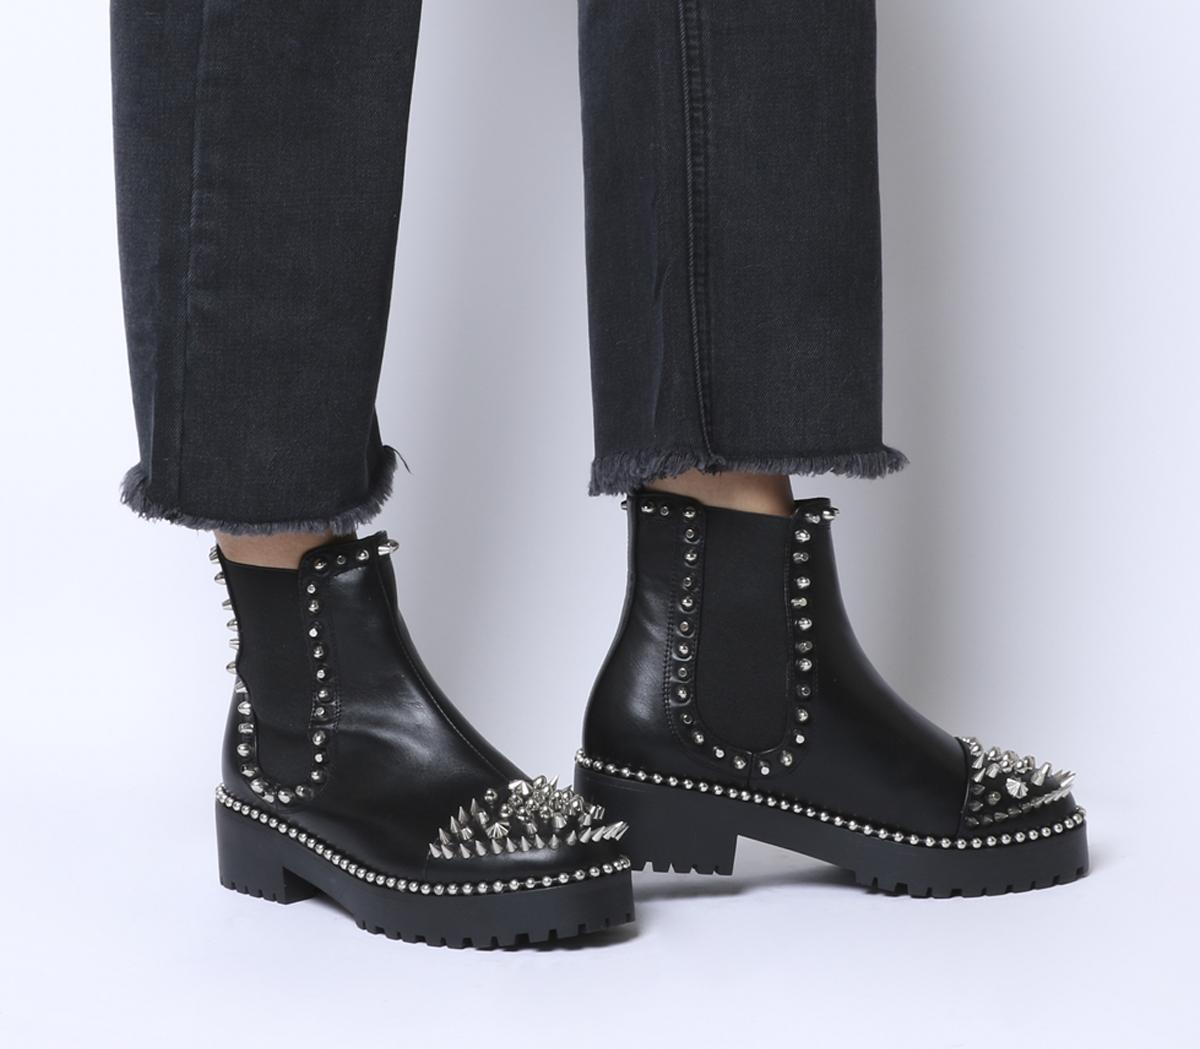 Ego Jack Stud Boots Black And Silver 